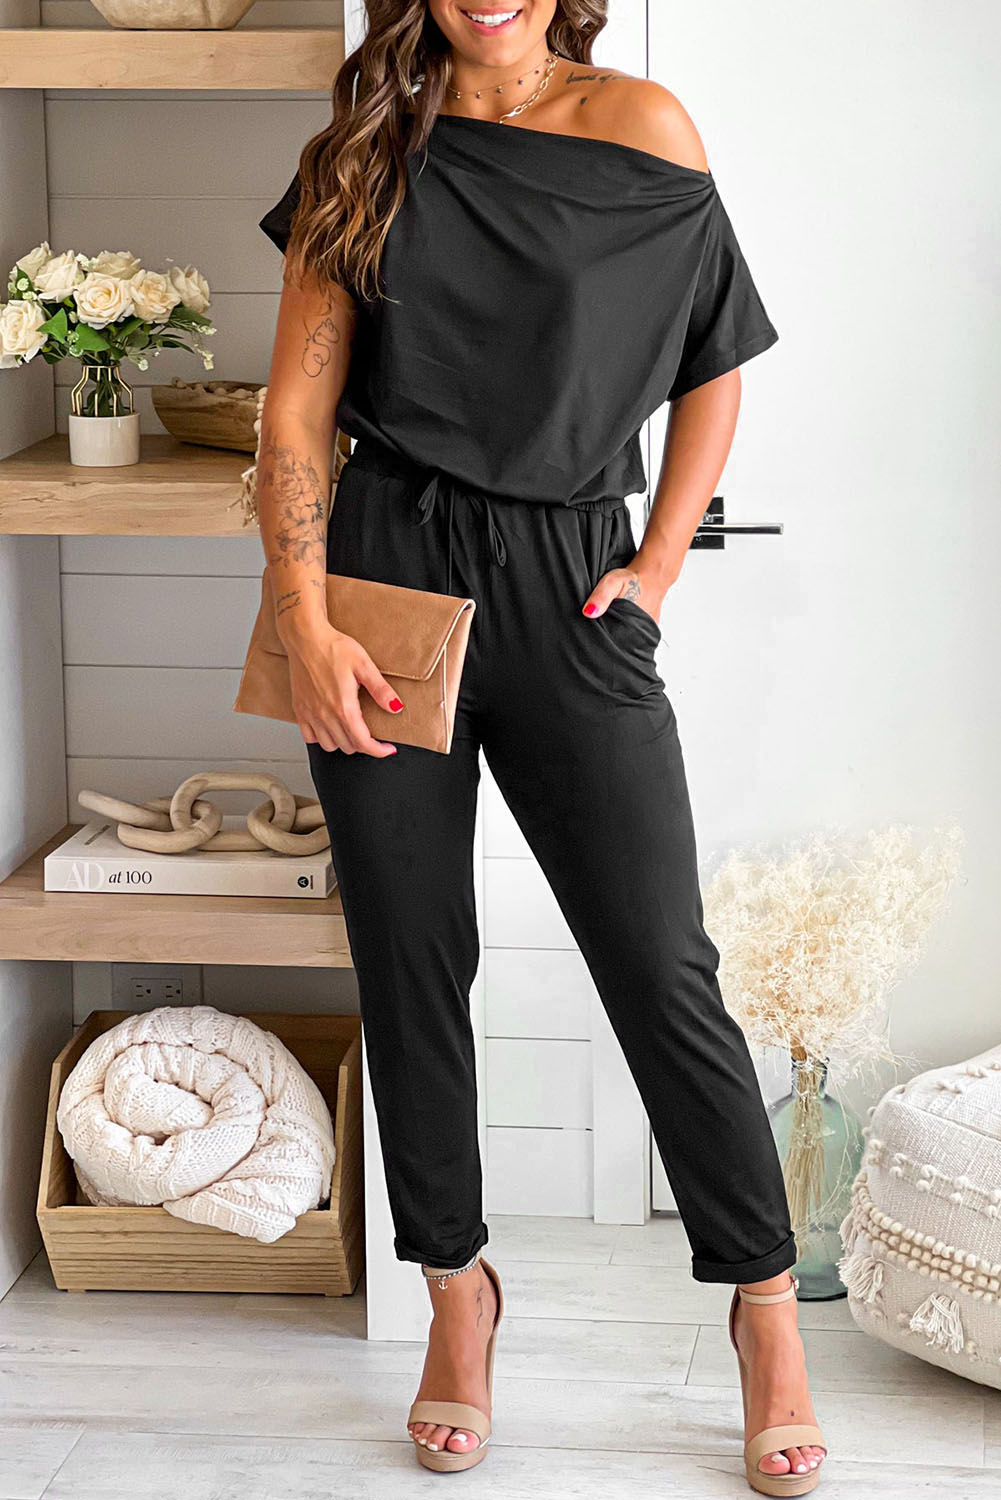 Shewin Wholesale CLOTHING Black Tie Waist Off Shoulder Short Sleeve Tapered Jumpsuit